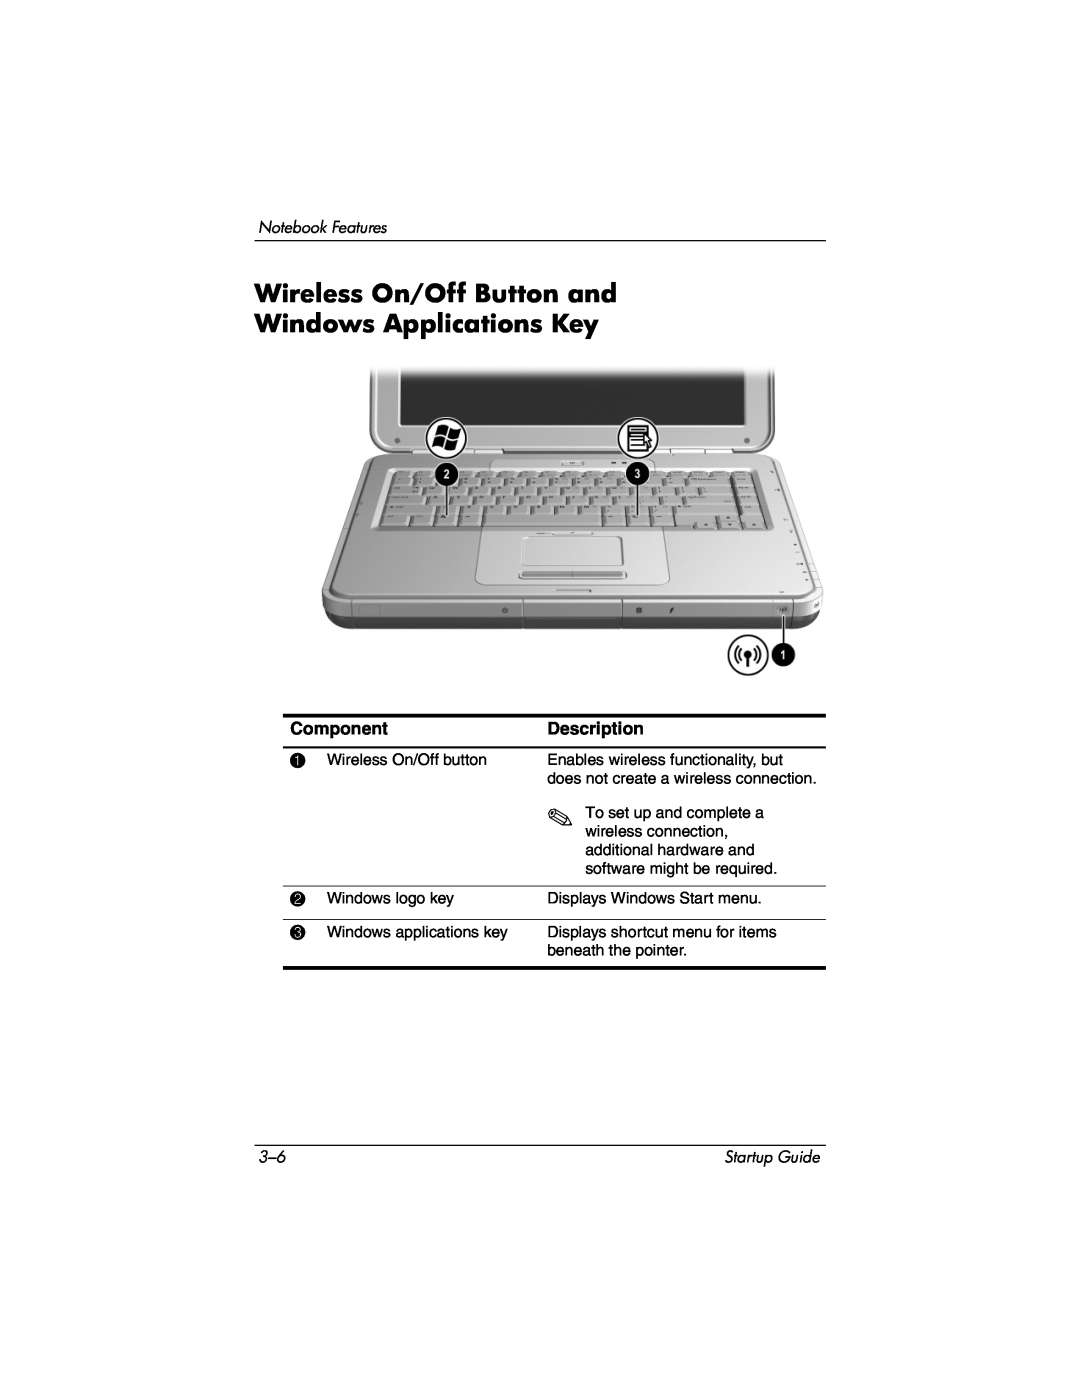 HP R3024AP, R3065US, R3070US Wireless On/Off Button and Windows Applications Key, Component, Description, Notebook Features 